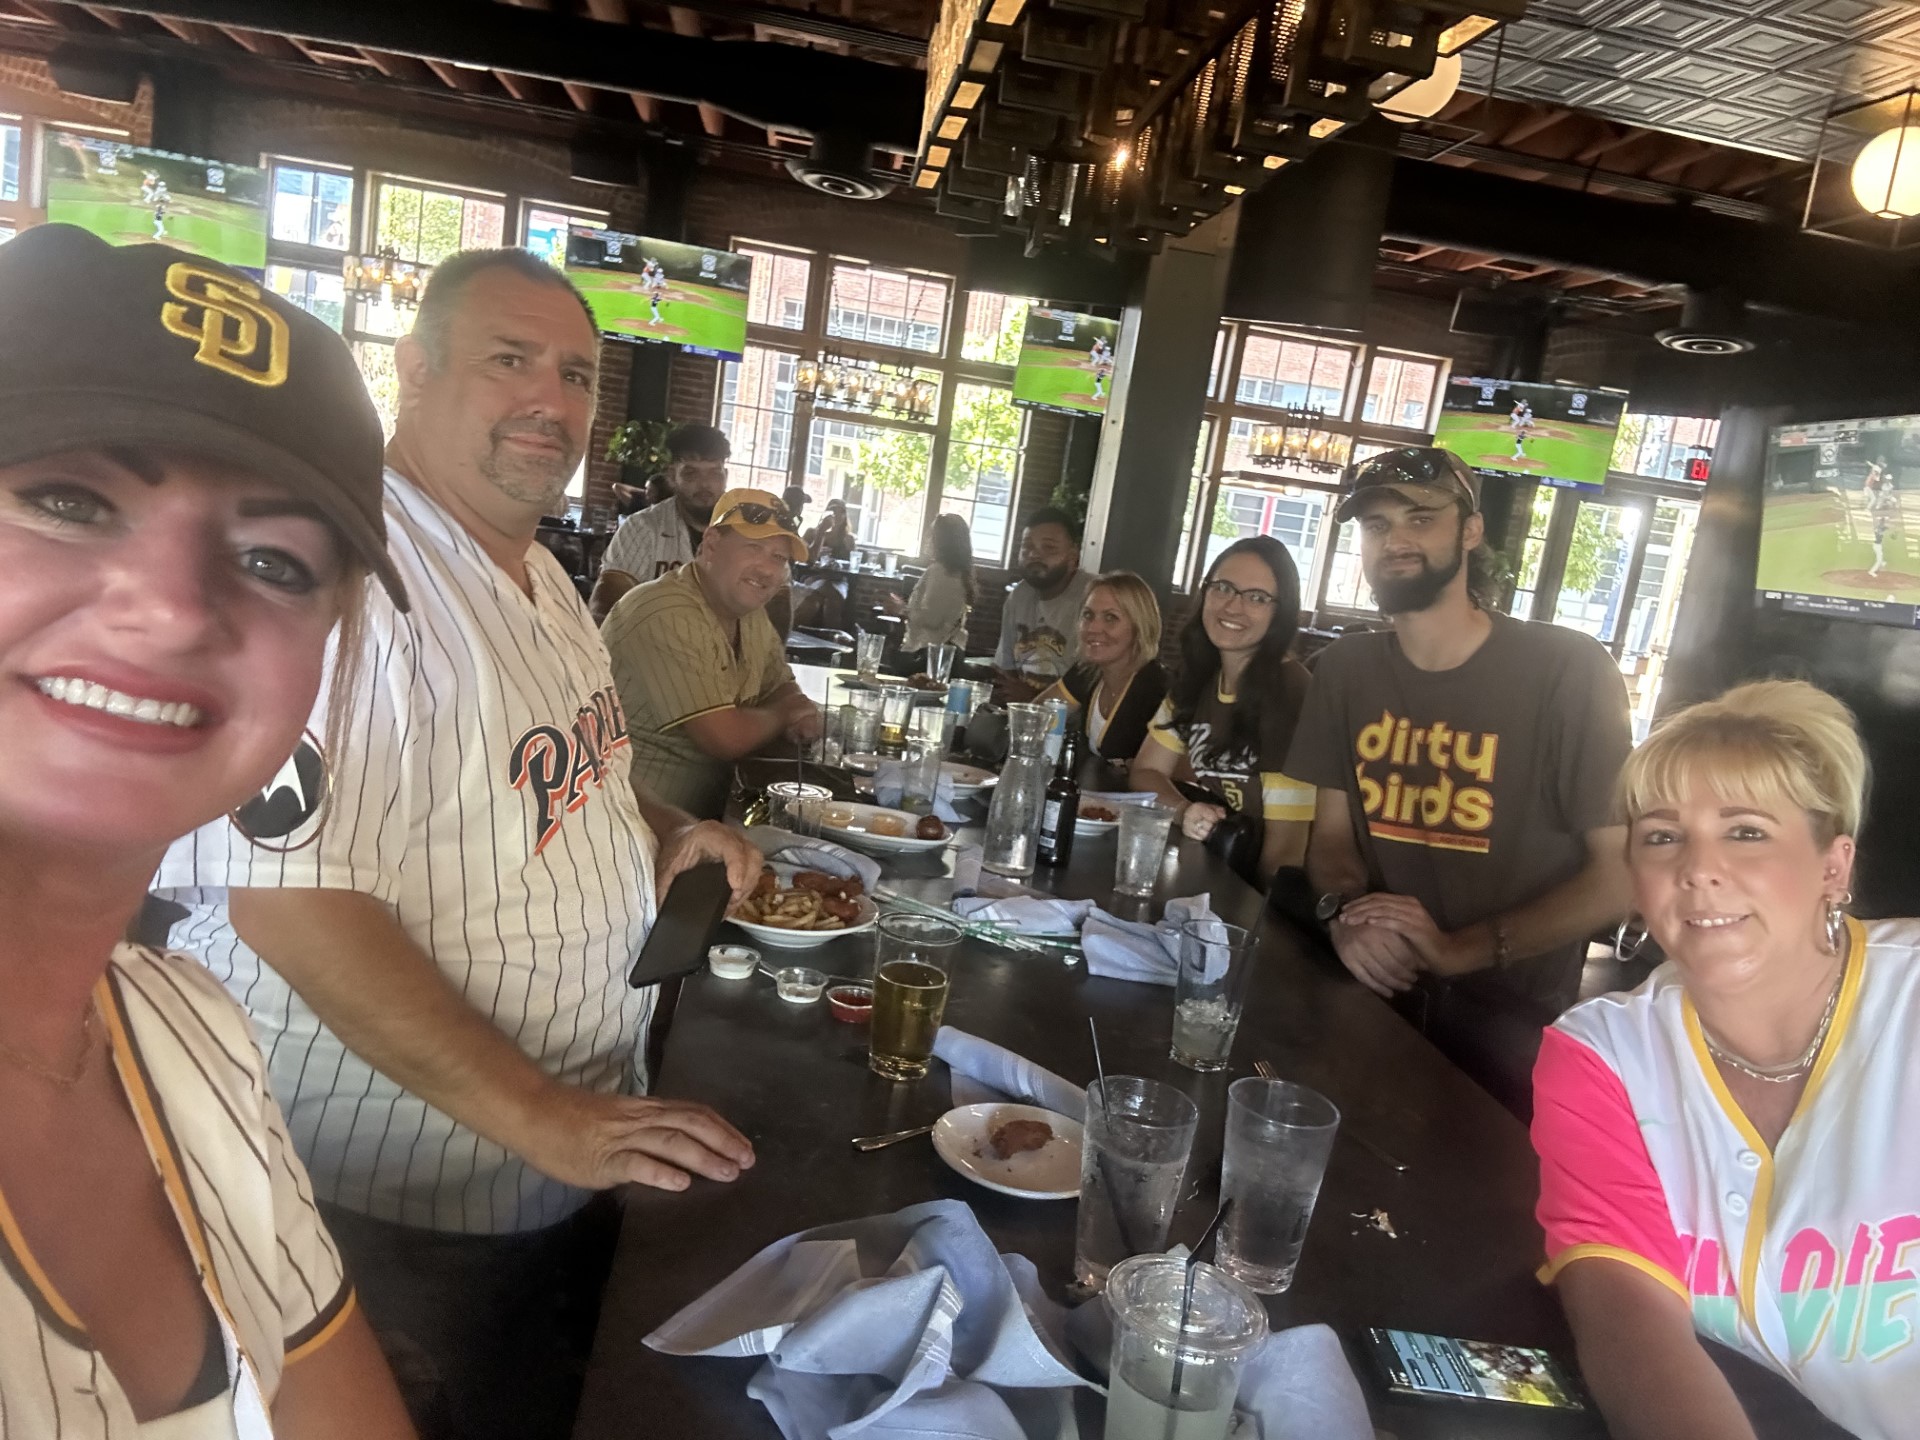 Team SERVPRO of Spring Valley/Jamul getting excited about the Padres games downtown San Diego. We are proud to be sponsors of the San Diego Padres!